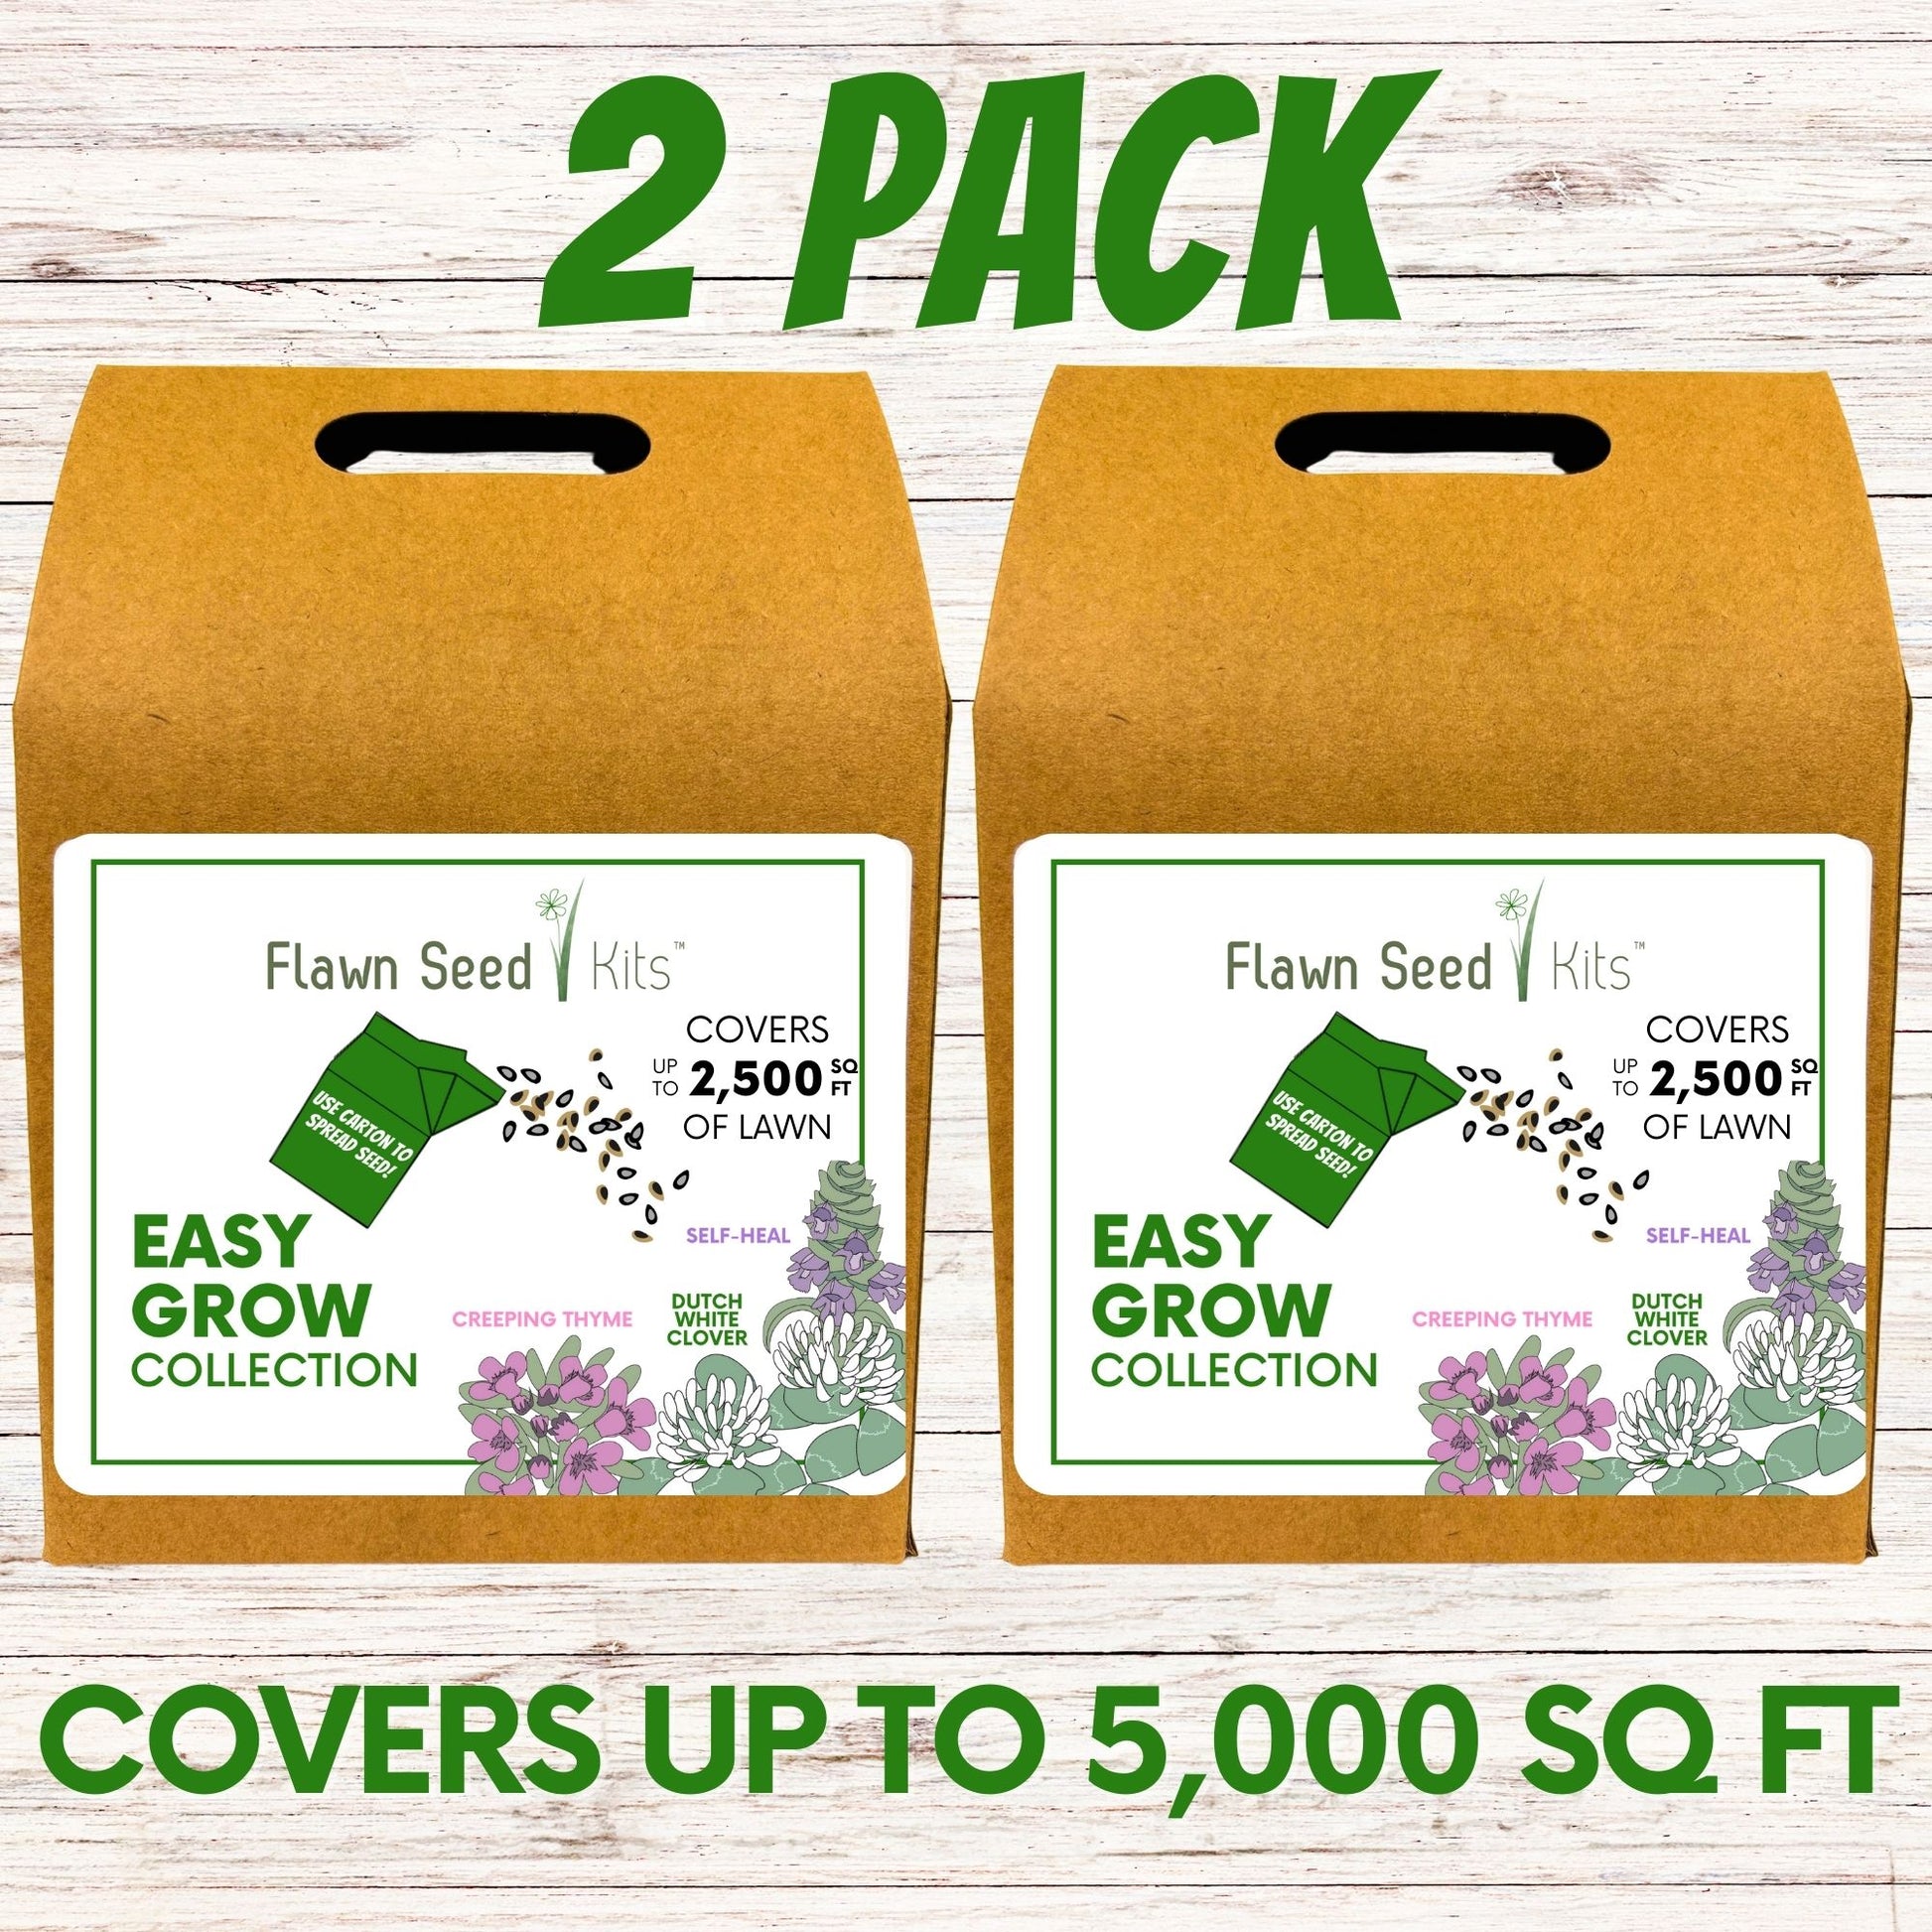 Bee Lawn Flowering Pollinator Seed Kit, Dutch White Clover, Self-Heal, Creeping Thyme, Easy Spread Container 2 Pack Covers 5,000 square feet